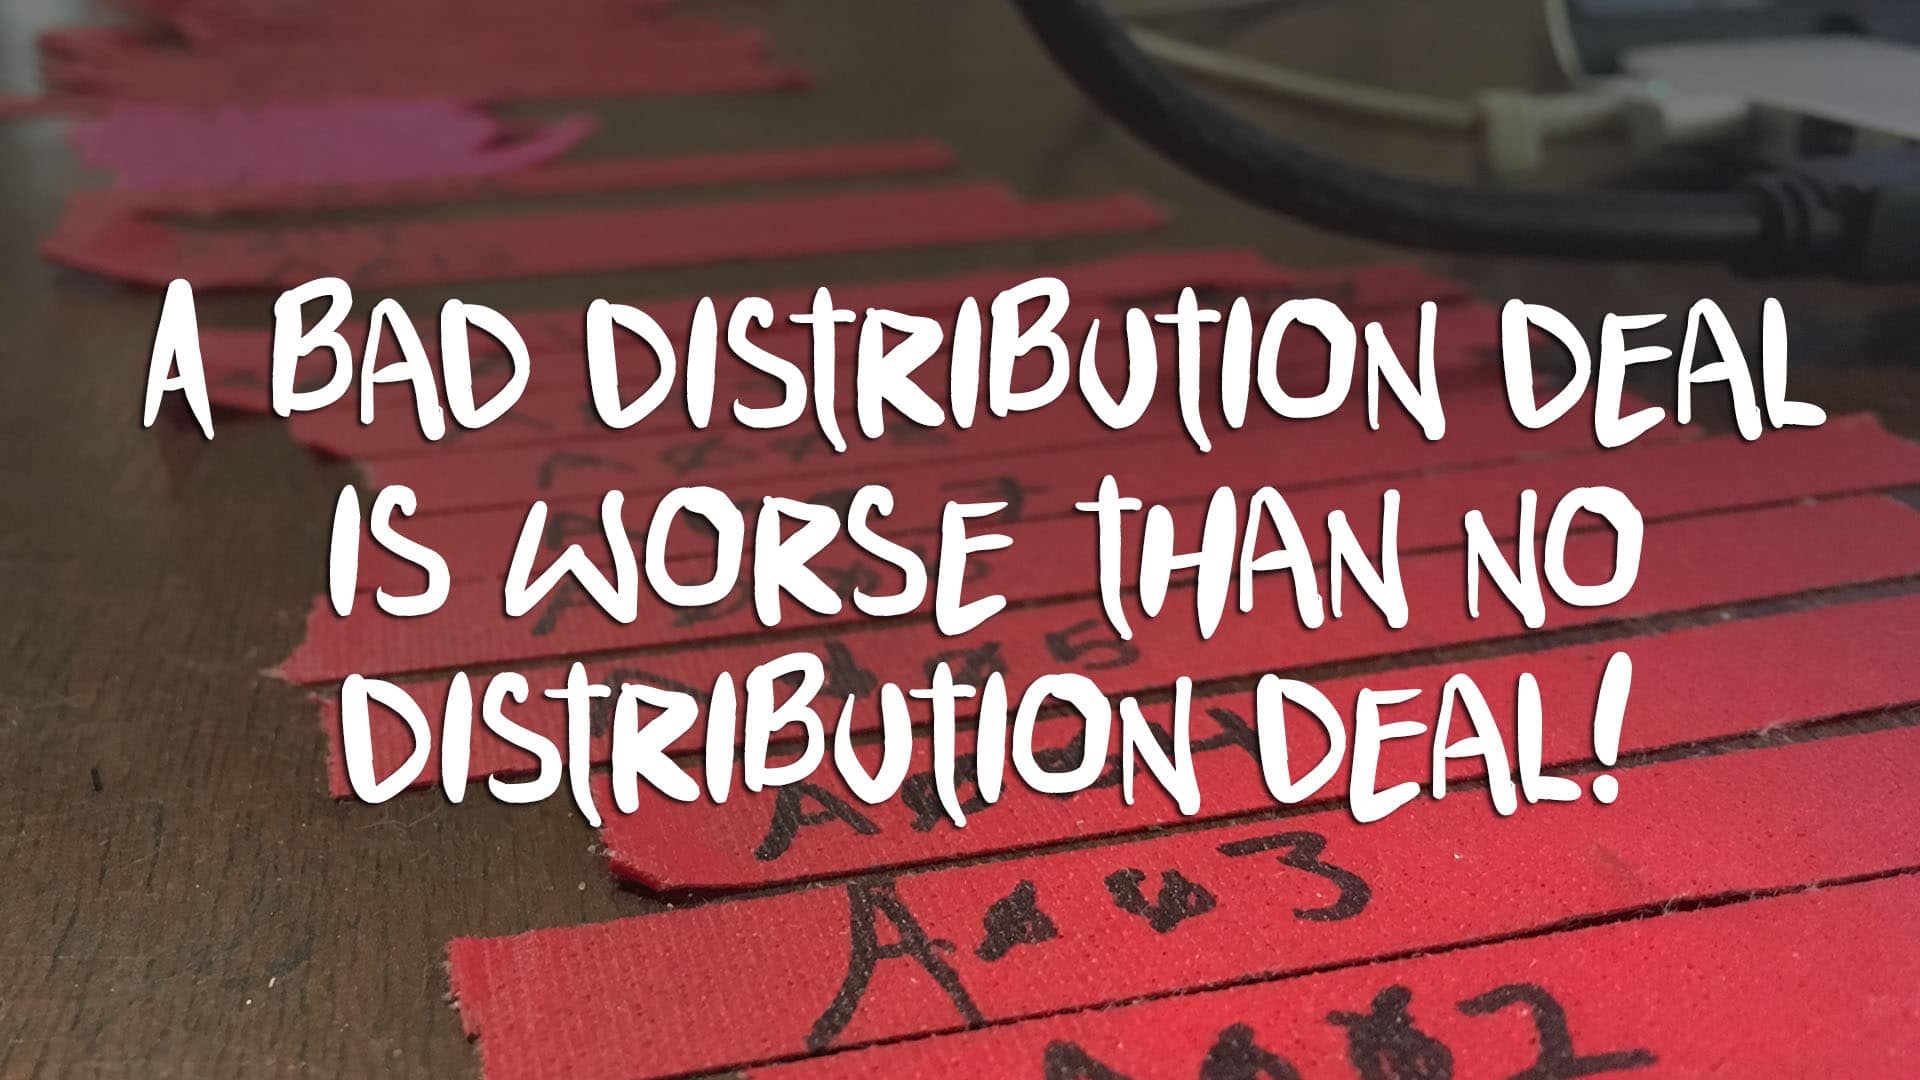 A bad distribution deal is worse than no distribution deal!